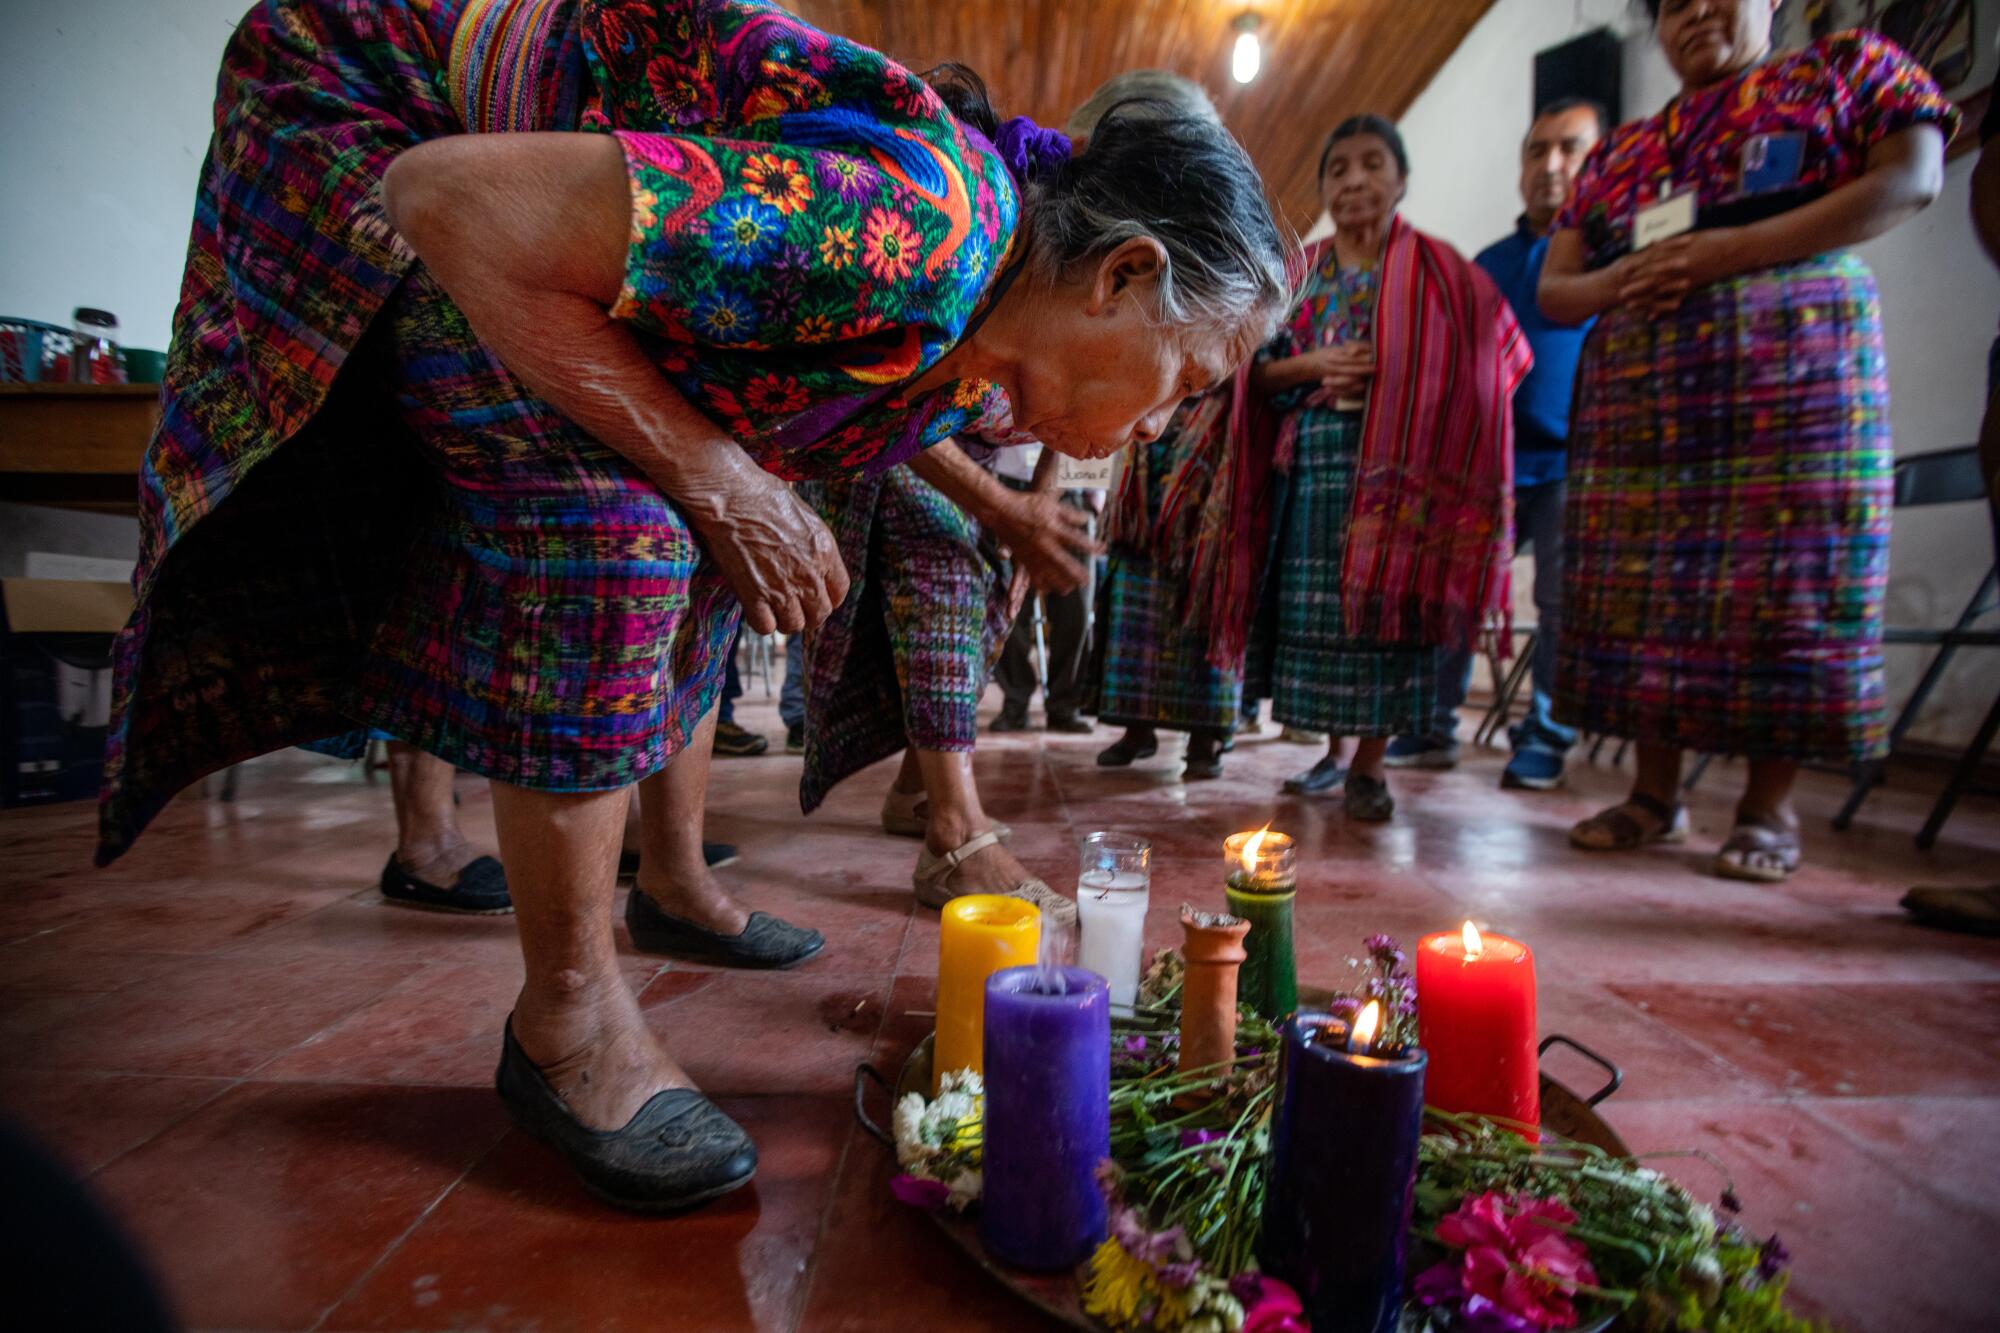 A woman in colorful dress blows out one of the candles at her feet 